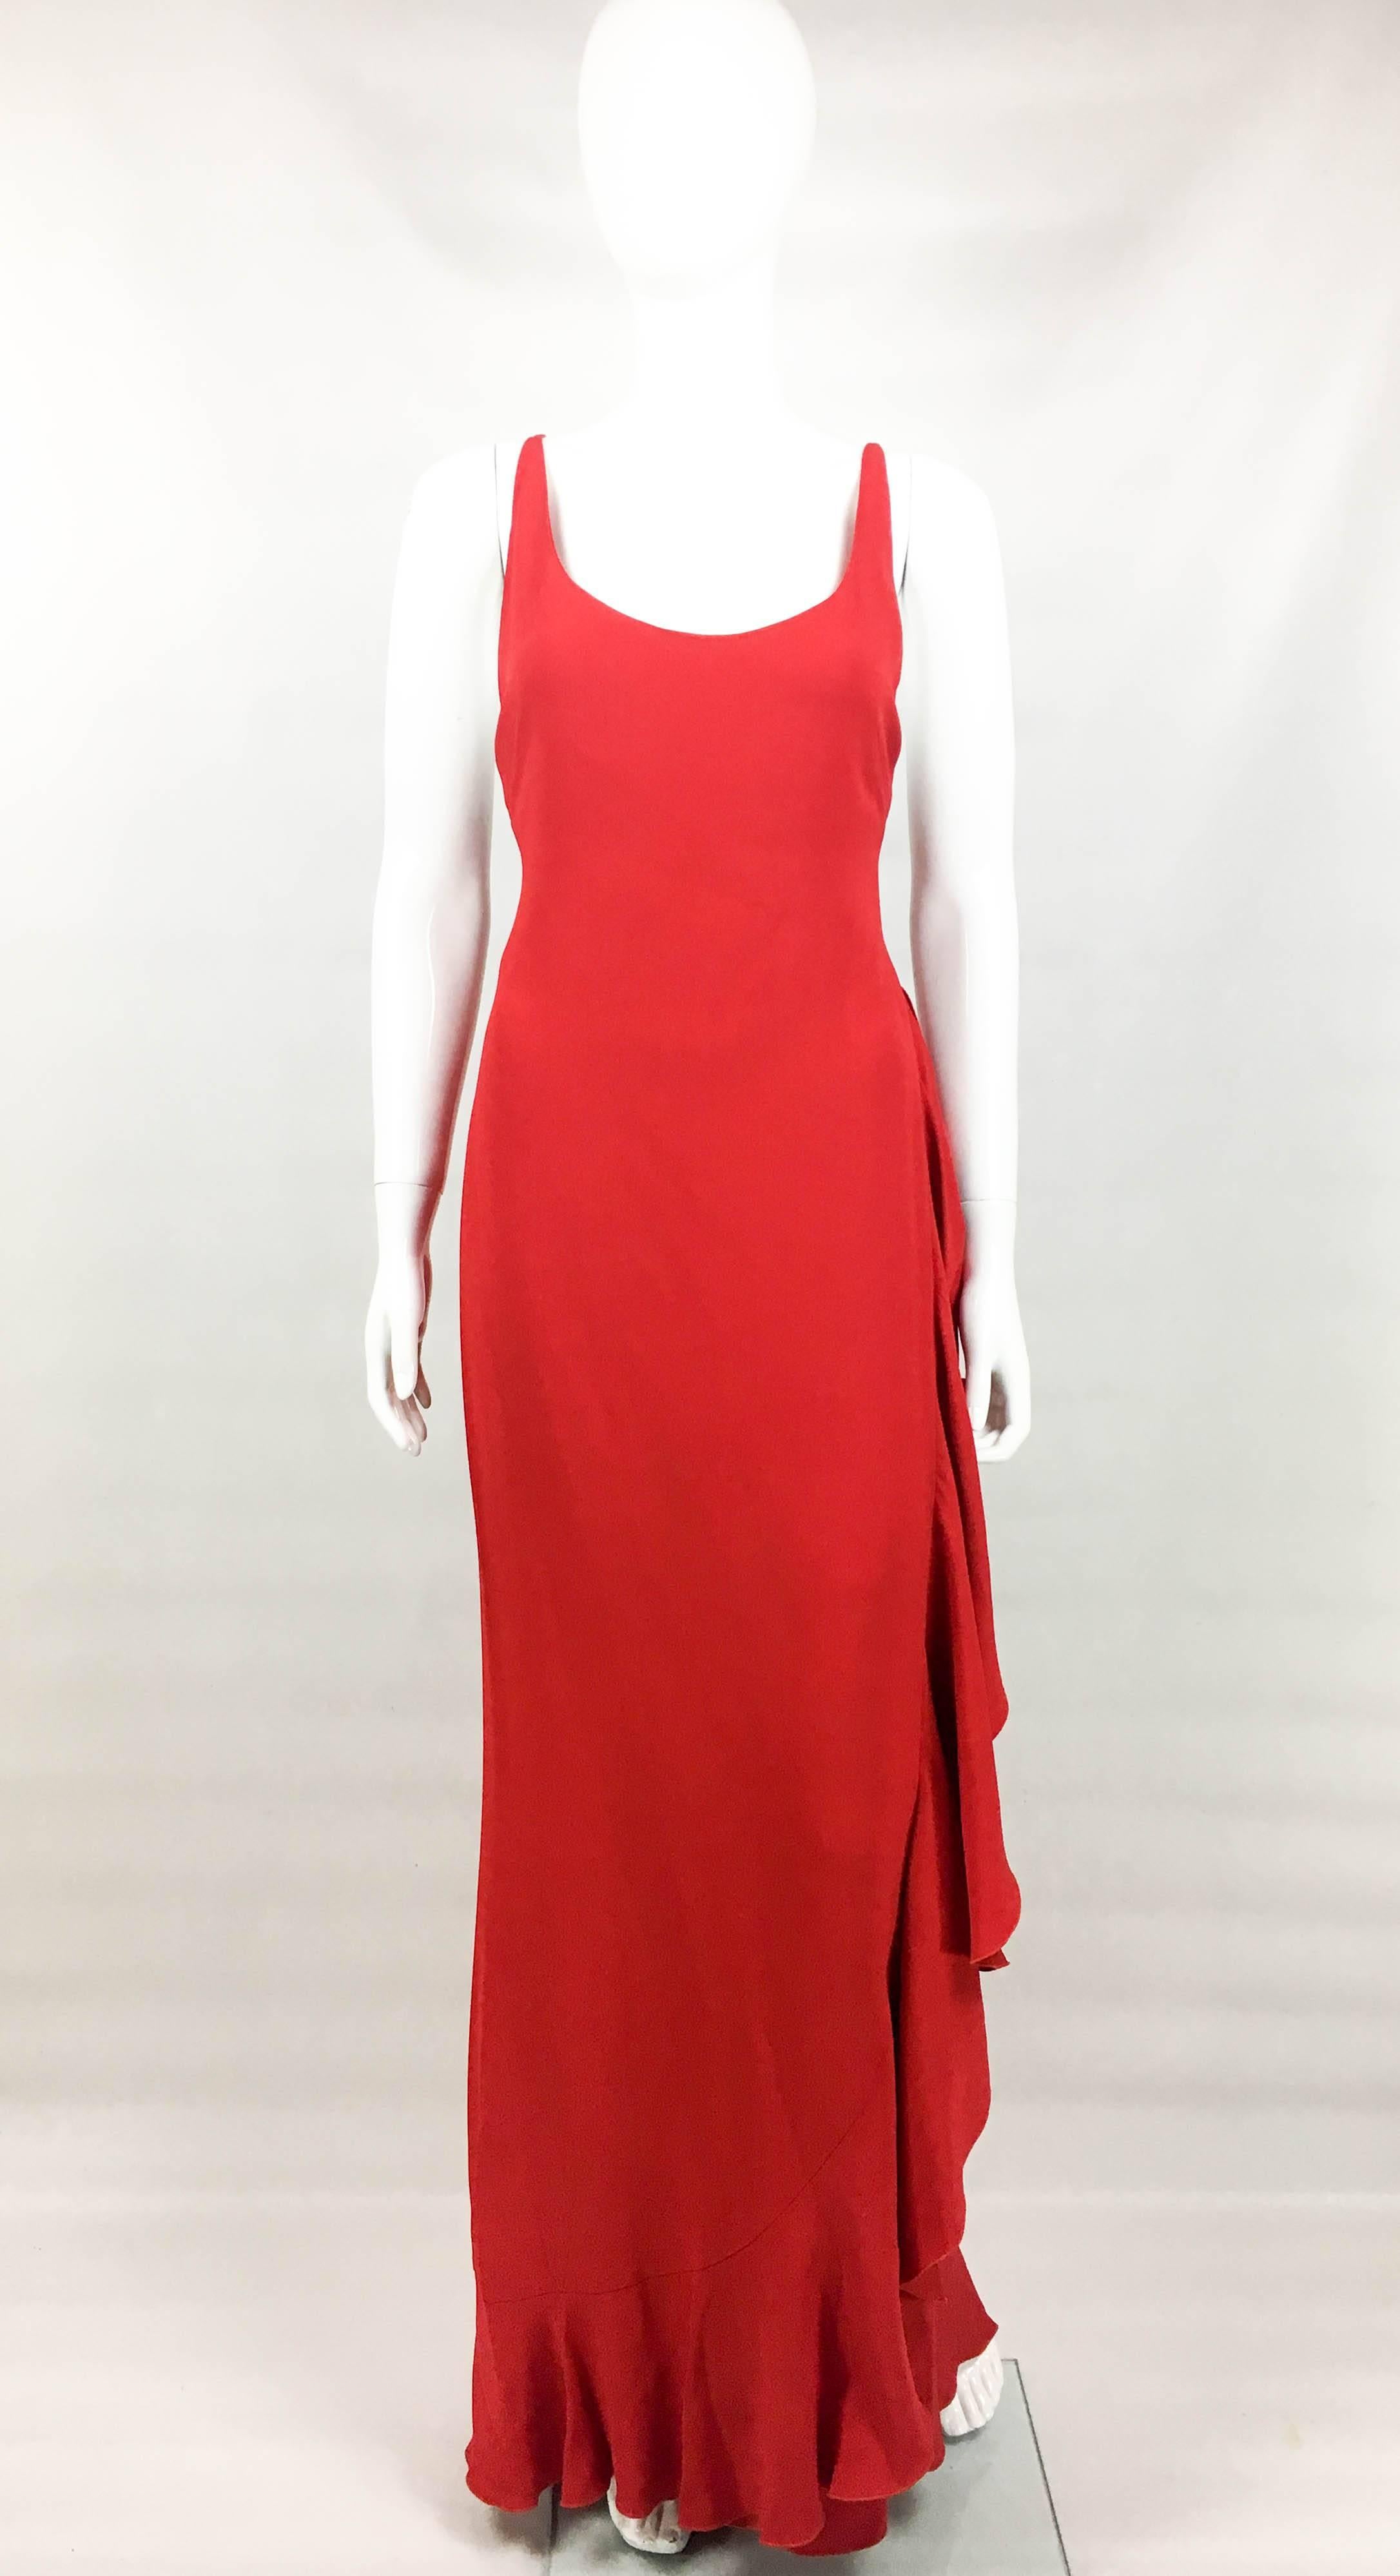 Vintage Valentino Red Evening Gown. This gorgeous dress by Valentino dates back from the 1980’s. Made in red silk, it is flamenco-inspired with a flounce and a cross back. The silhouette is very flattering and it moves beautifully. This dress